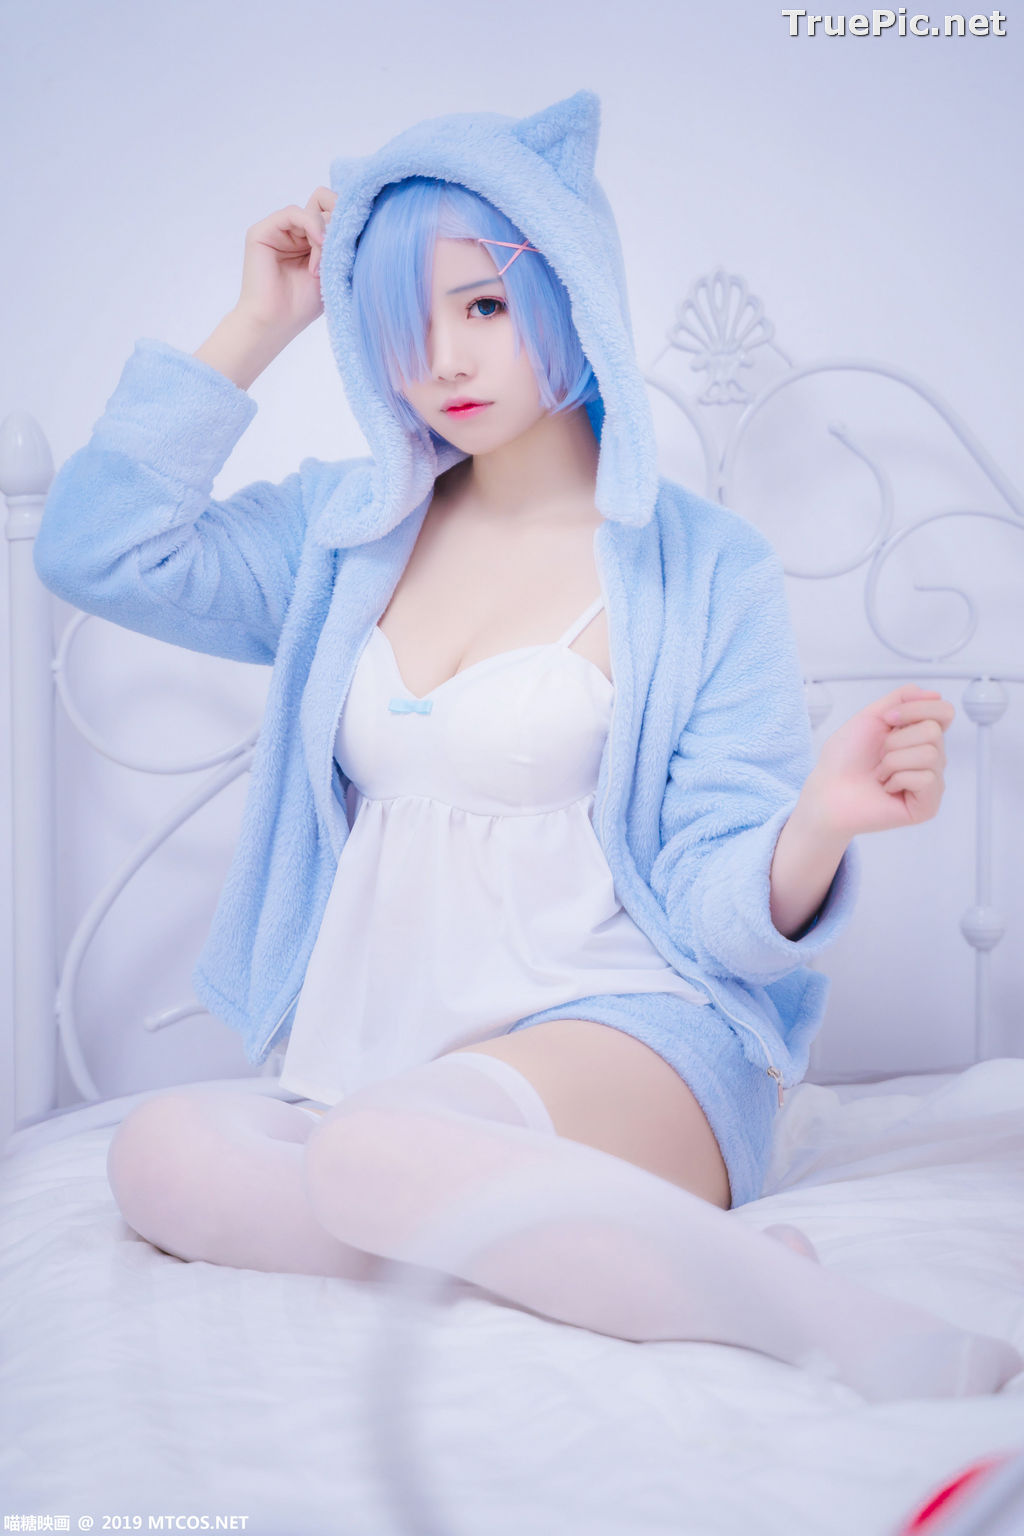 Image [MTCos] 喵糖映画 Vol.043 – Chinese Cute Model – Sexy Rem Cosplay - TruePic.net - Picture-32